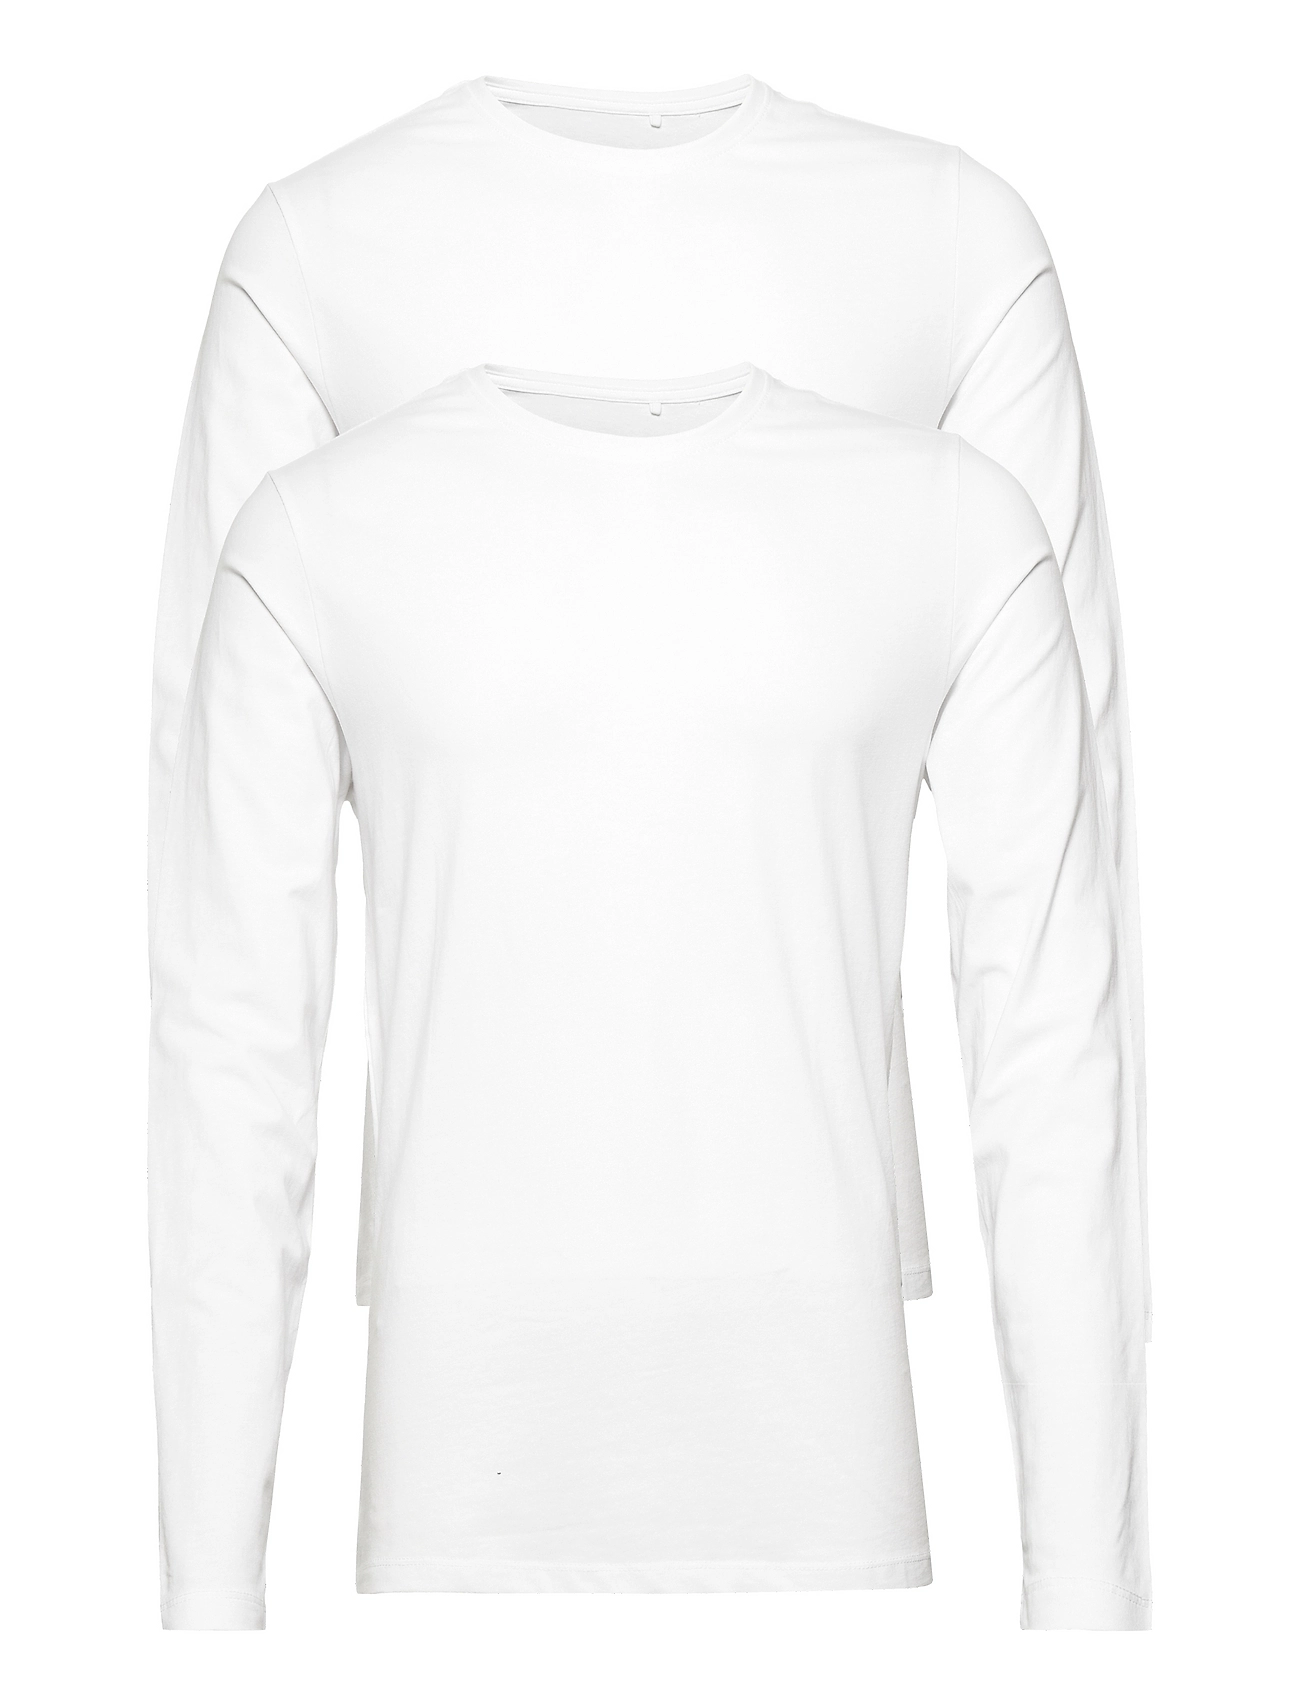 2-pack Long-sleeved Bhdinton Ls t-shirts Blend - Neck Crew